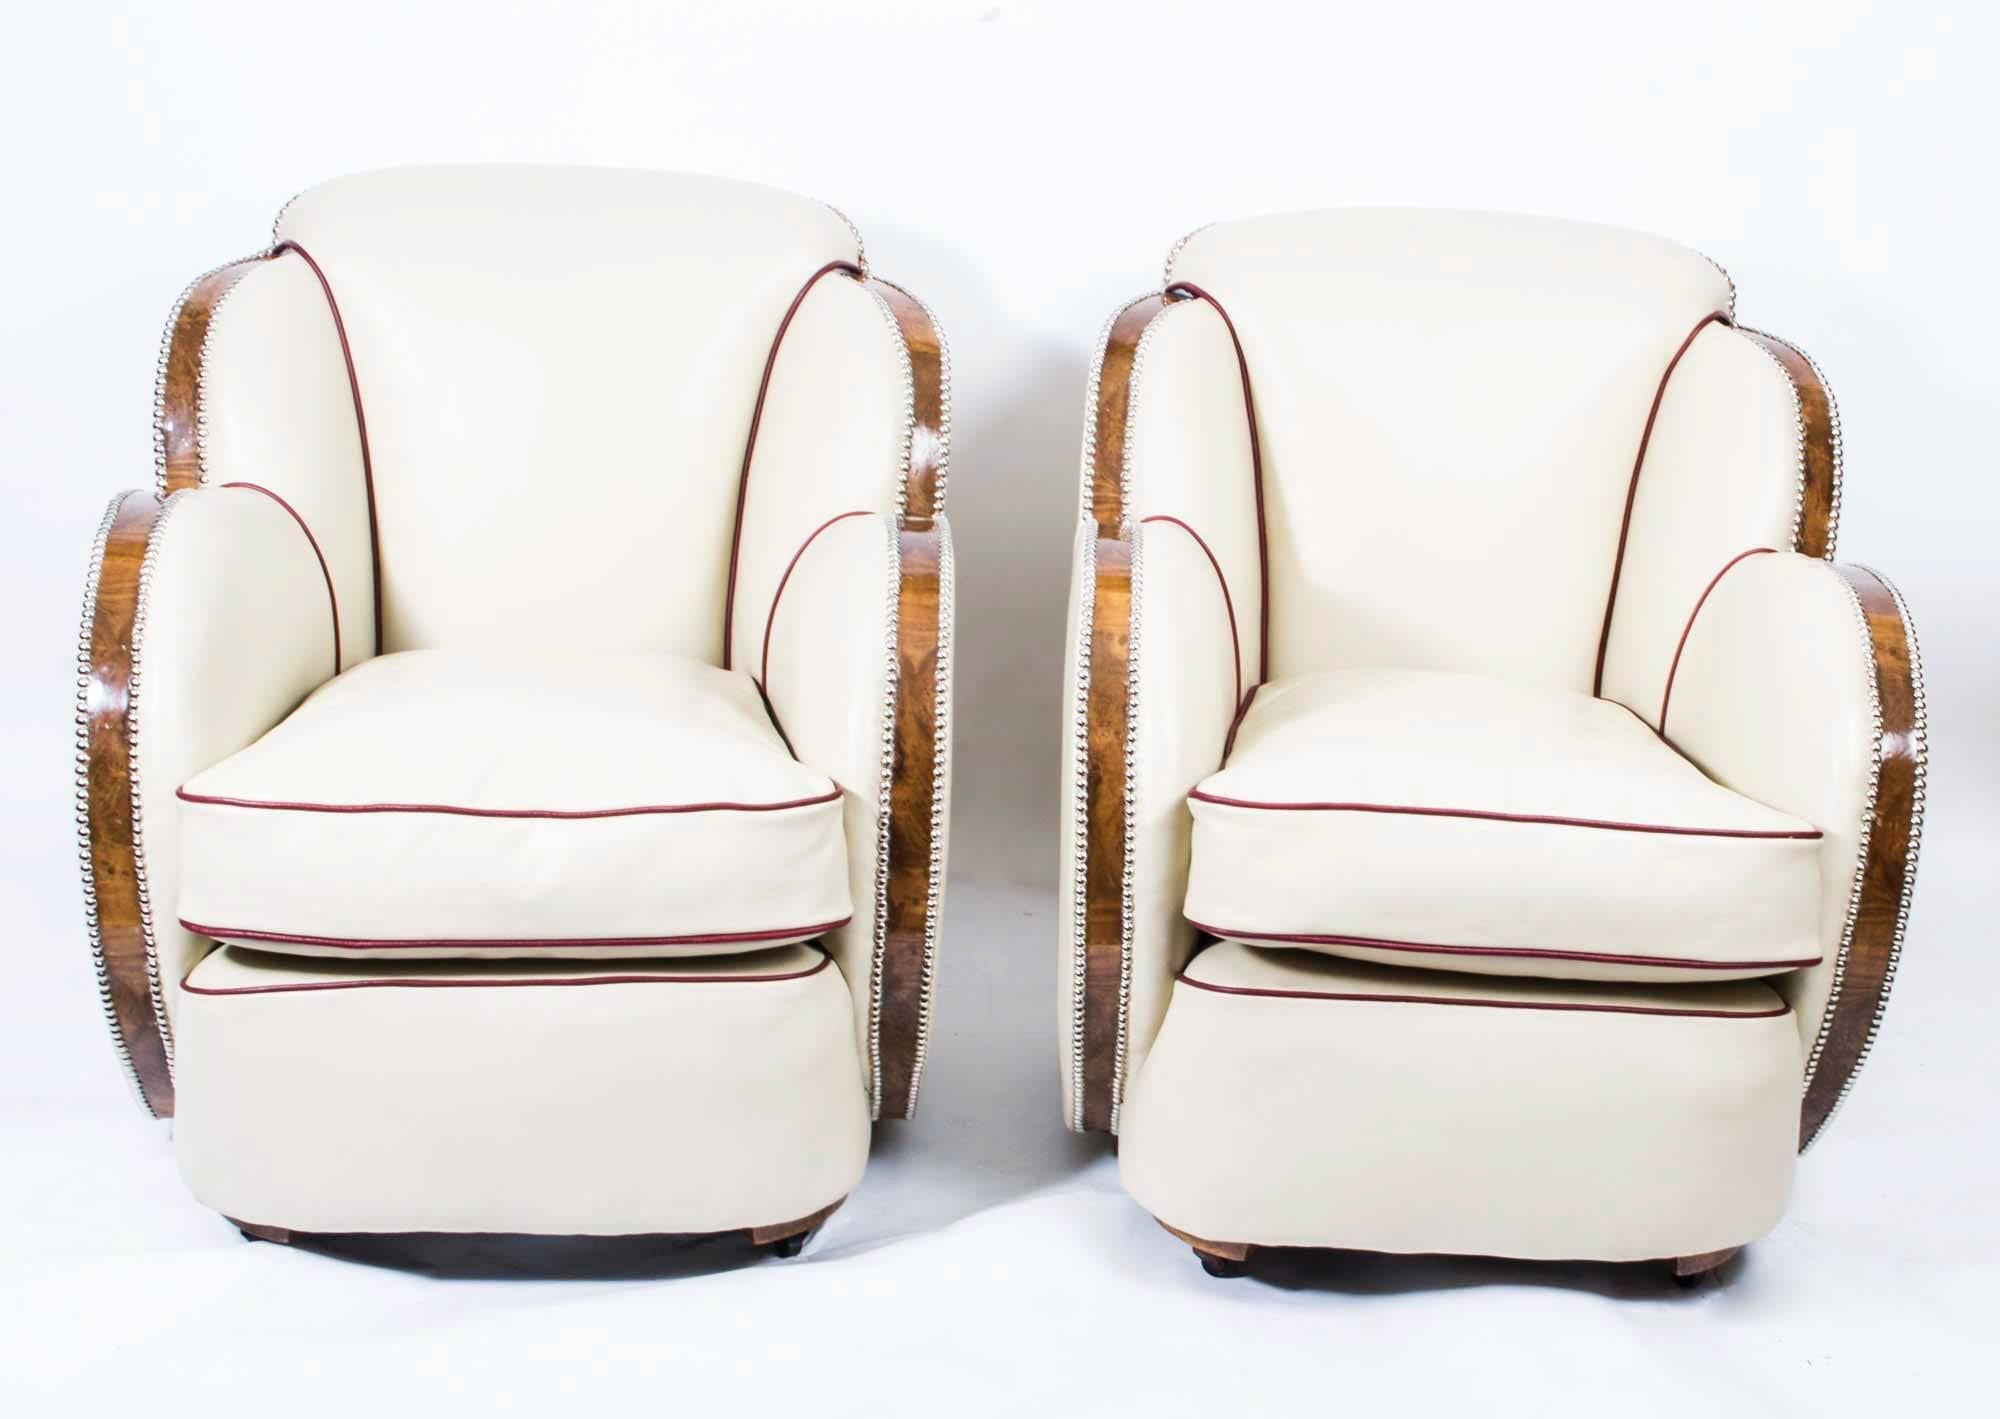 This is a stunning and rare pair of original antique 1930s Art Deco cloud back armchairs by Epstein.

Each armchair is cloud shaped with a comfortable cushion seat and beautiful burr walnut show wood.

Both have been stripped back to a bare